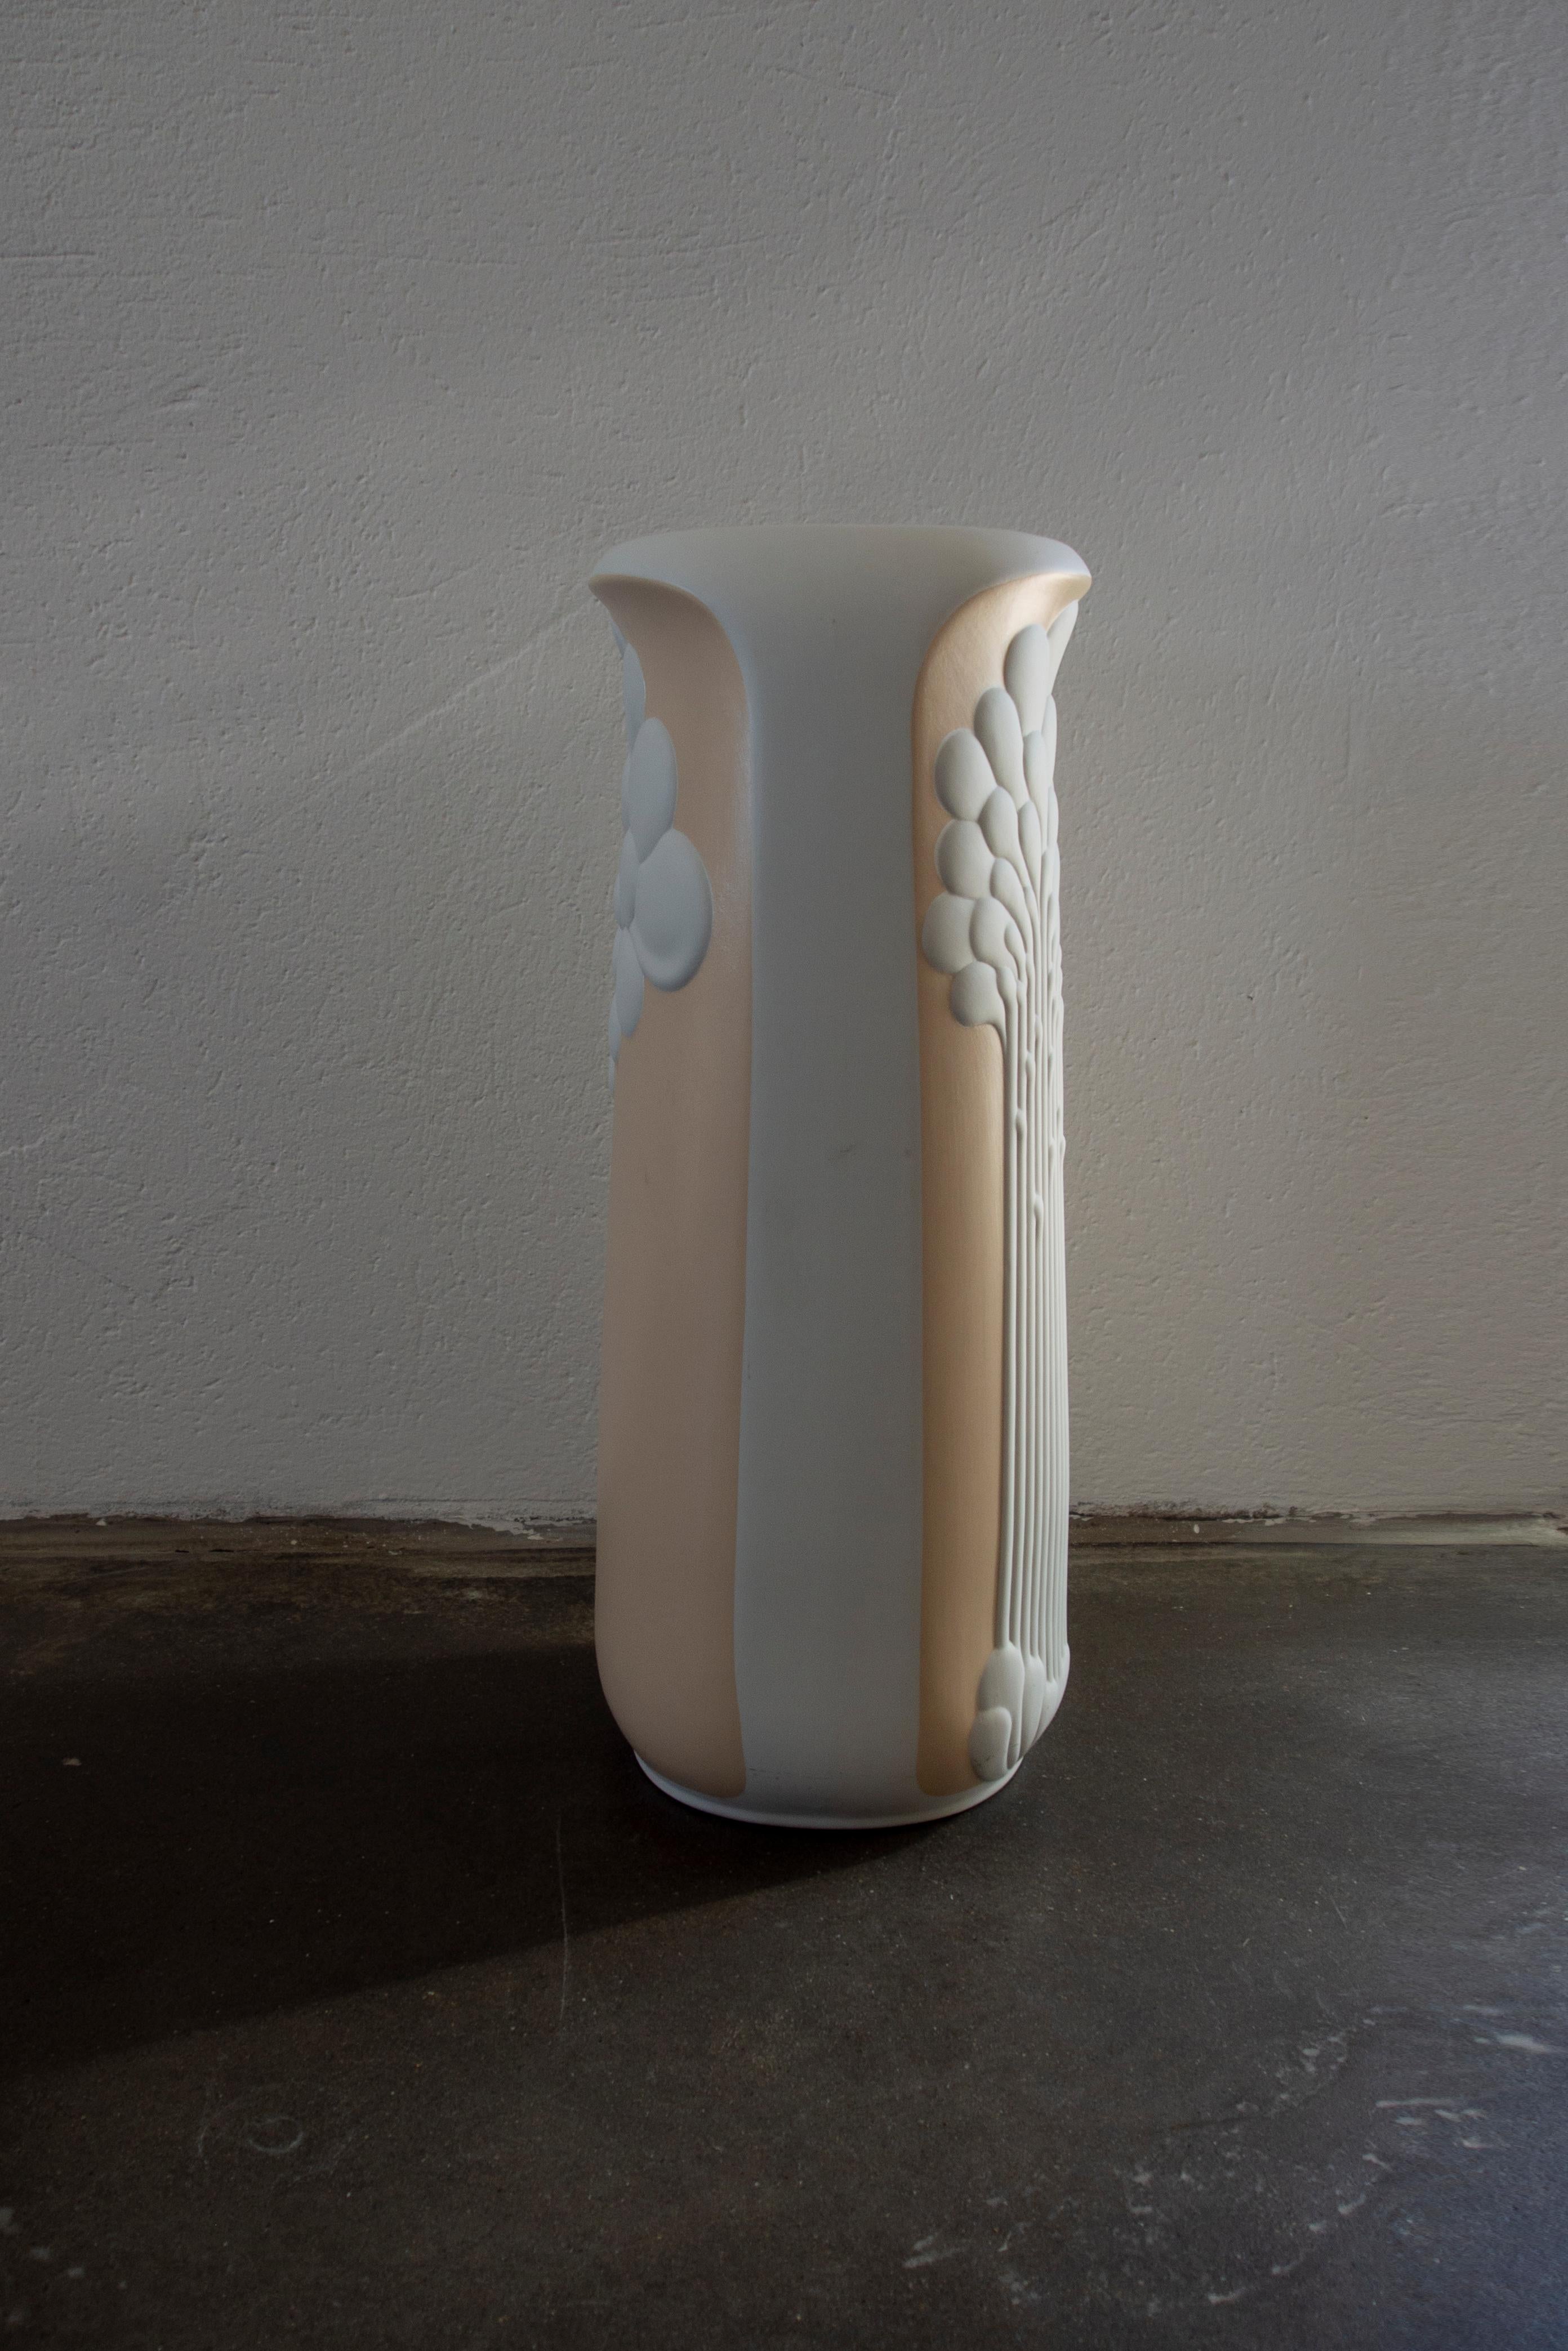 In this listing you may find a gorgeous, huge Op Art floor vase in white and sand, unglazed bisque porcelain designed by Manfred Frey and signed M. Frey. He was an in-house designer for Kaiser in Germany. The porcelain vase is quite large and rare